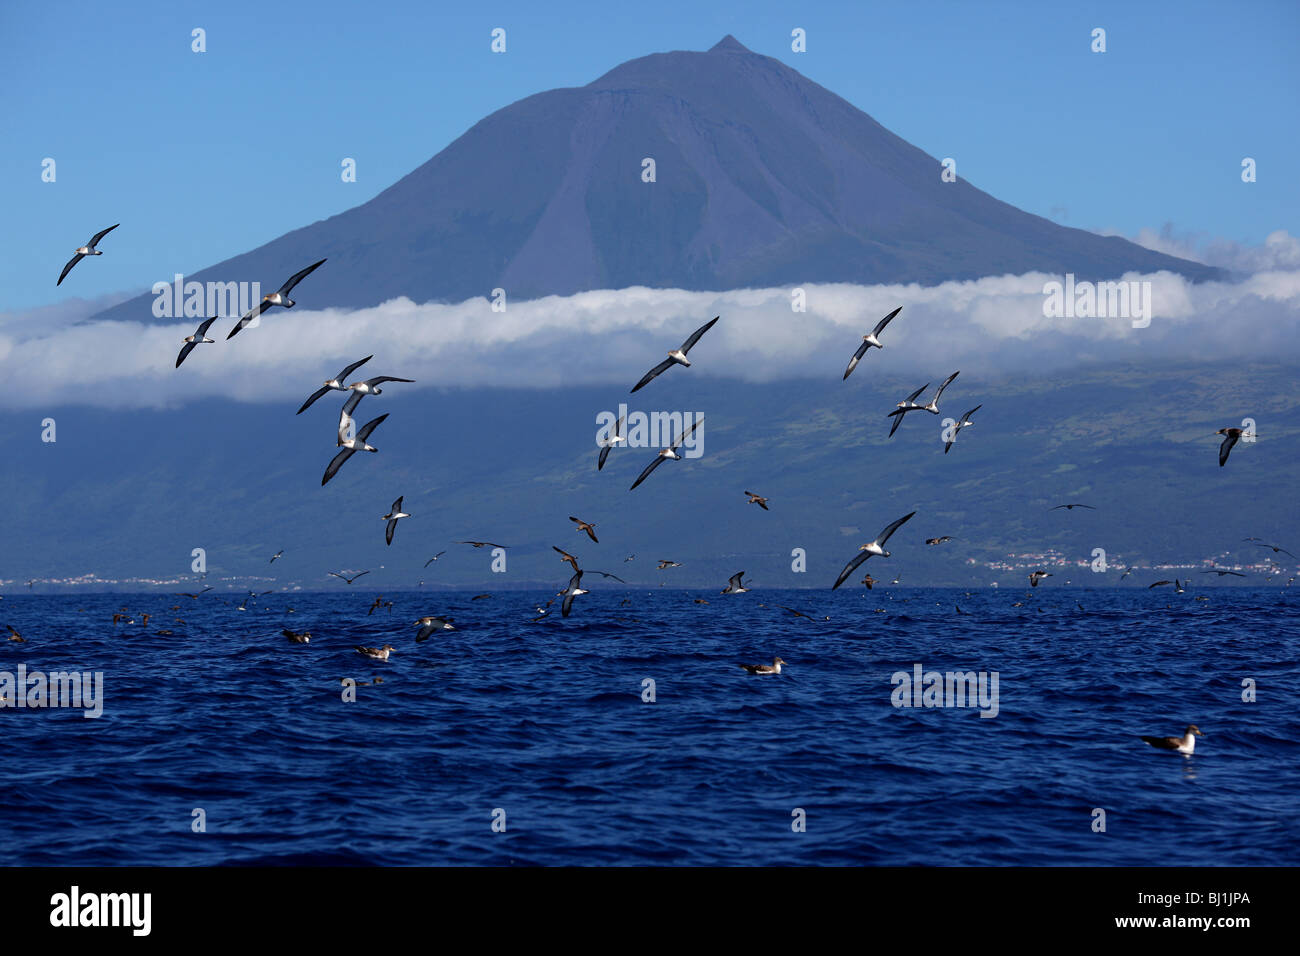 Cory's shearwater flight formation with Pico mountain in the backgroung. Pico Island, Azores, Portugal Stock Photo